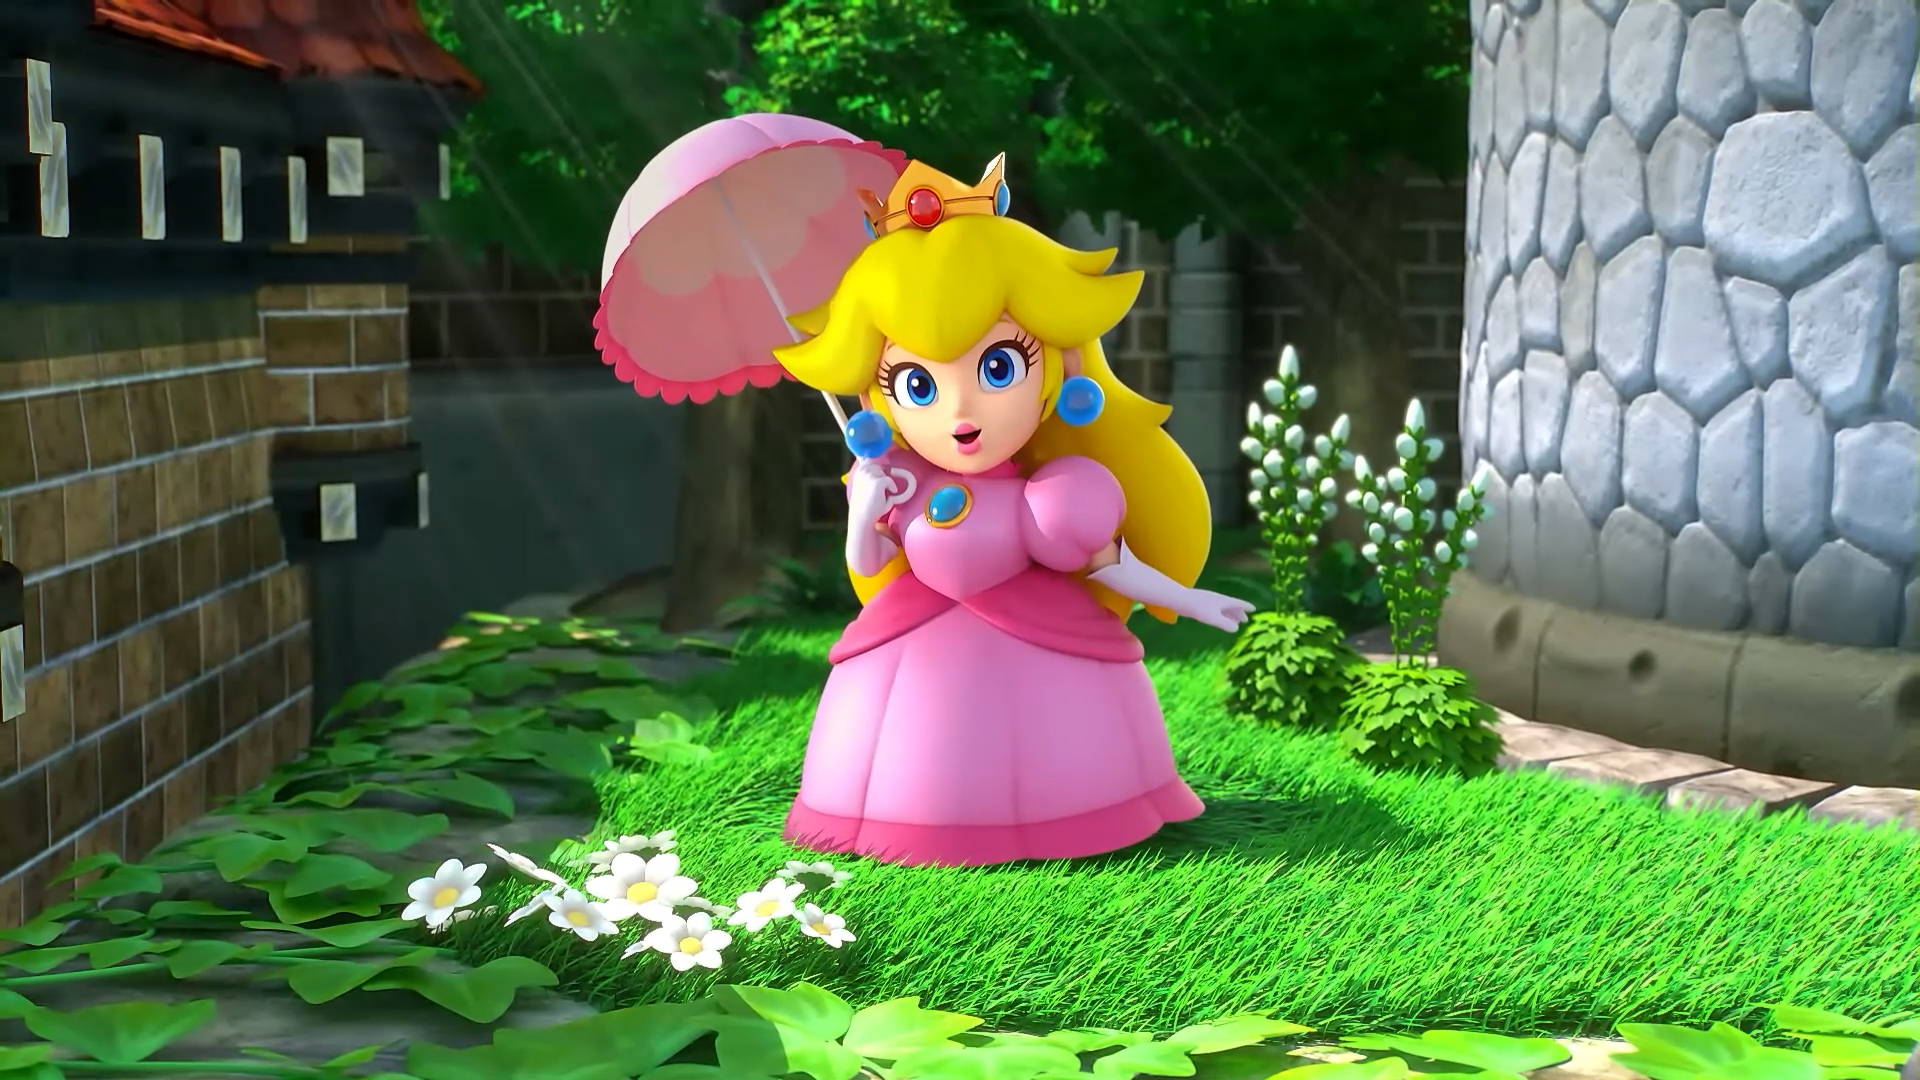 6 of the biggest announcements from the September Nintendo Direct